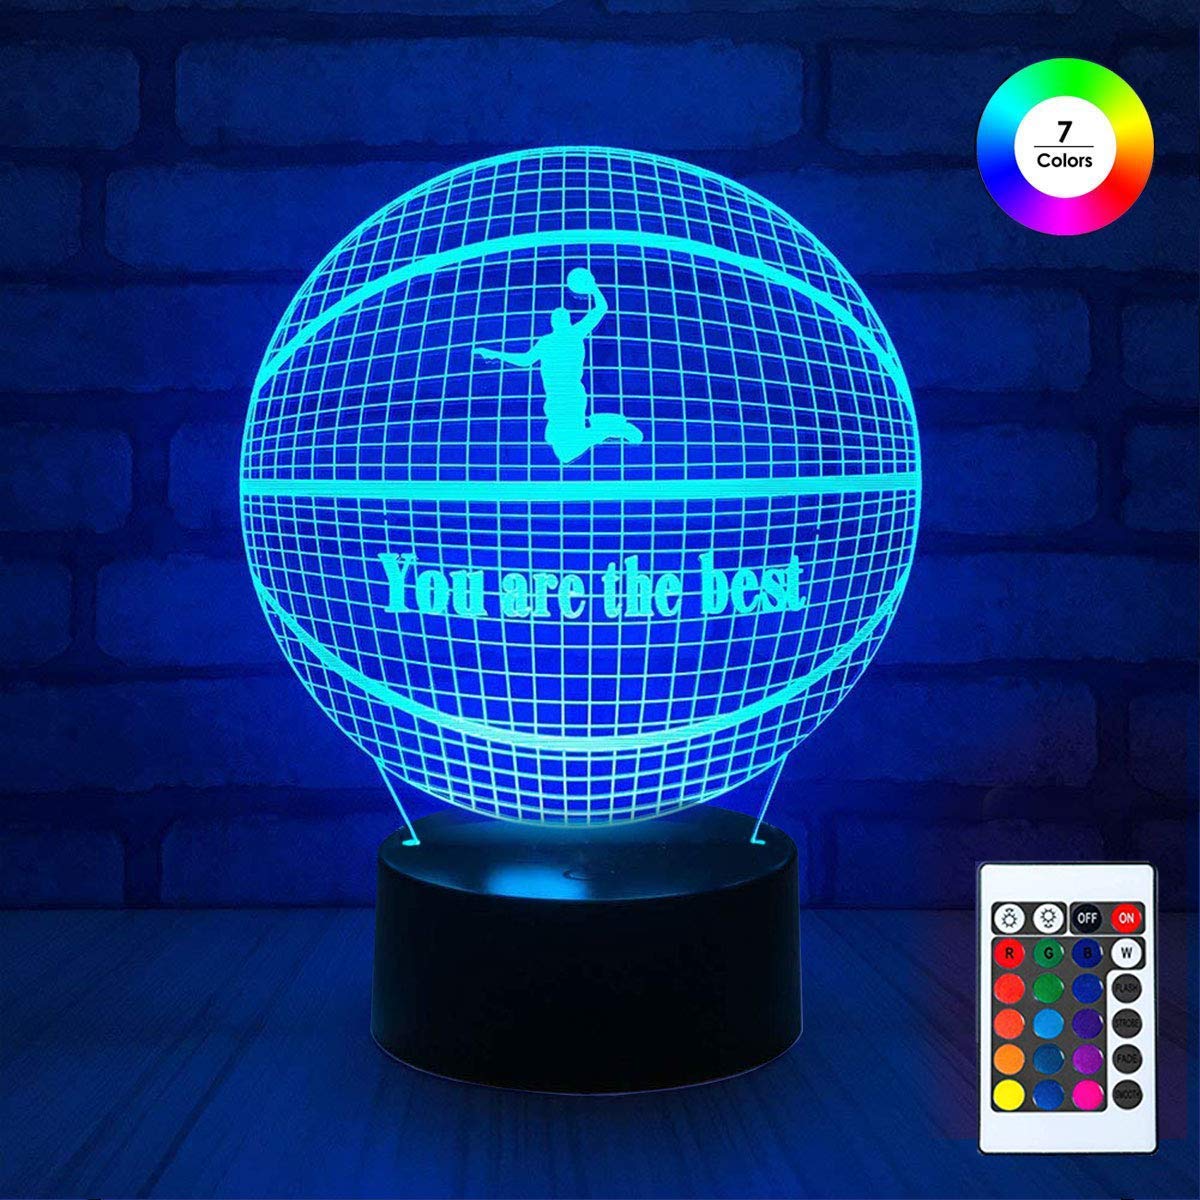 Epicgadget 3D Remote Night Light for Kids, Touch Control Optical Illusion Visualization LED Night Stand Light 7 Colors Changing with Remote Control Nightstand Lamp Christmas Gifts (Basketball) - image 1 of 3